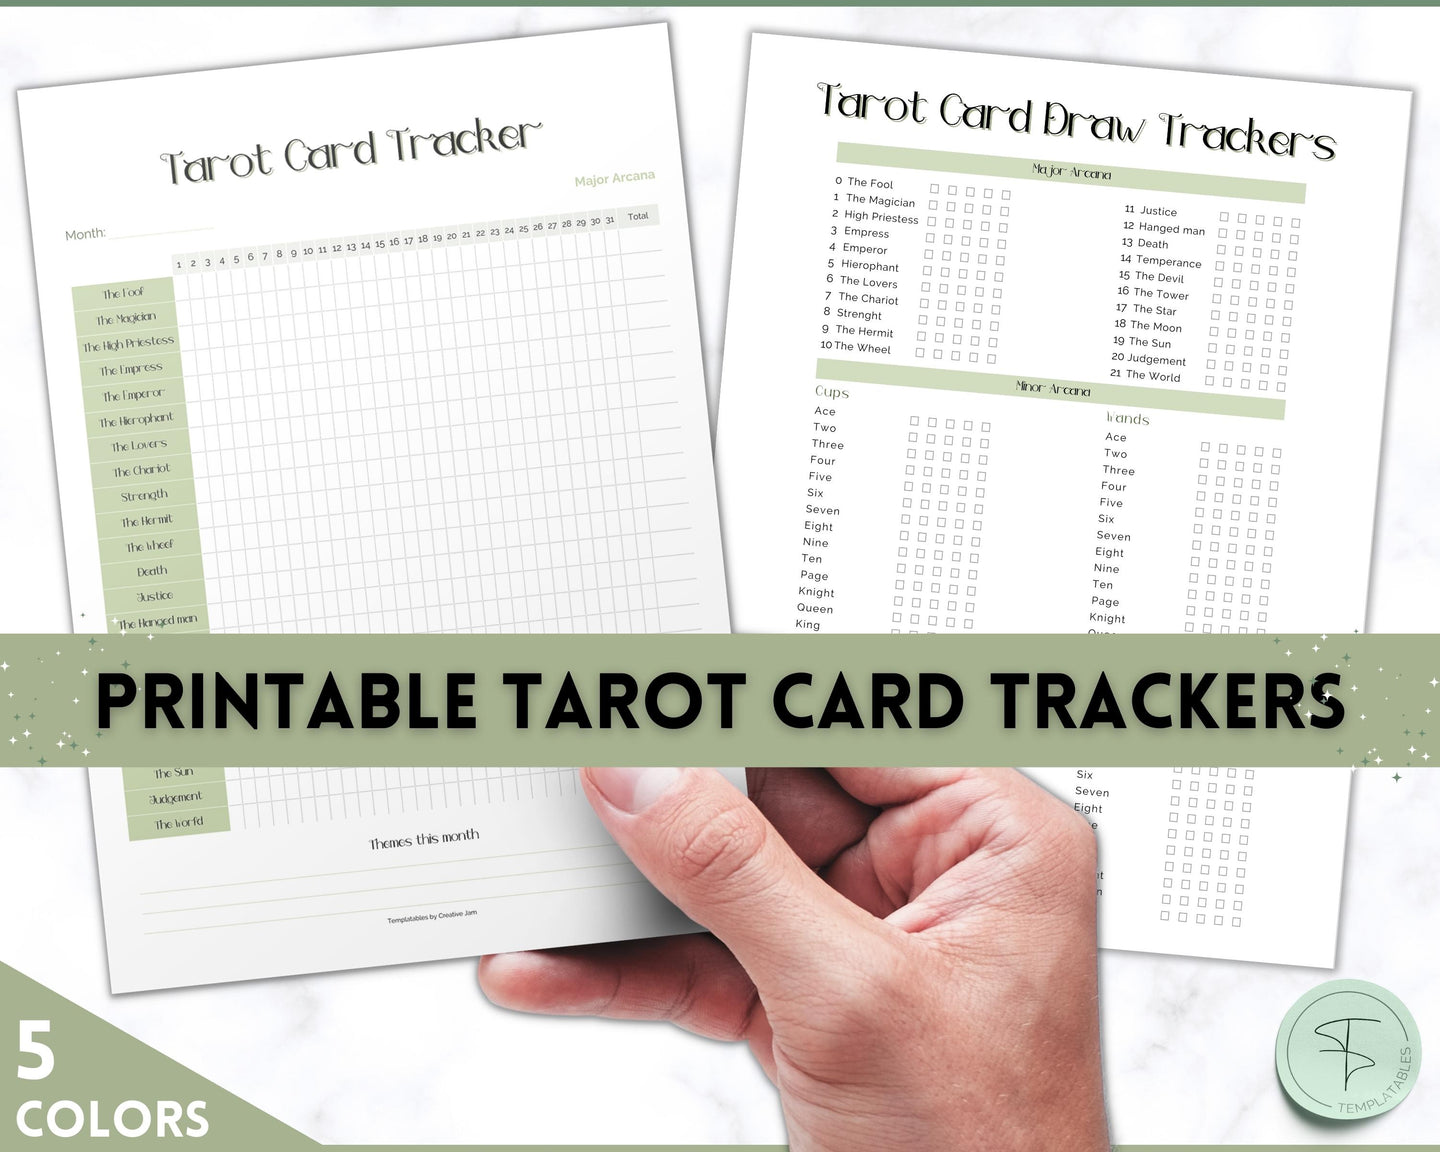 Tarot Card Trackers & Monthly Readings | Learn Tarot Card Readings, Tarot Spreads | Beginner Tarot Planner Workbook, Grimoire & Cheat Sheets | Green